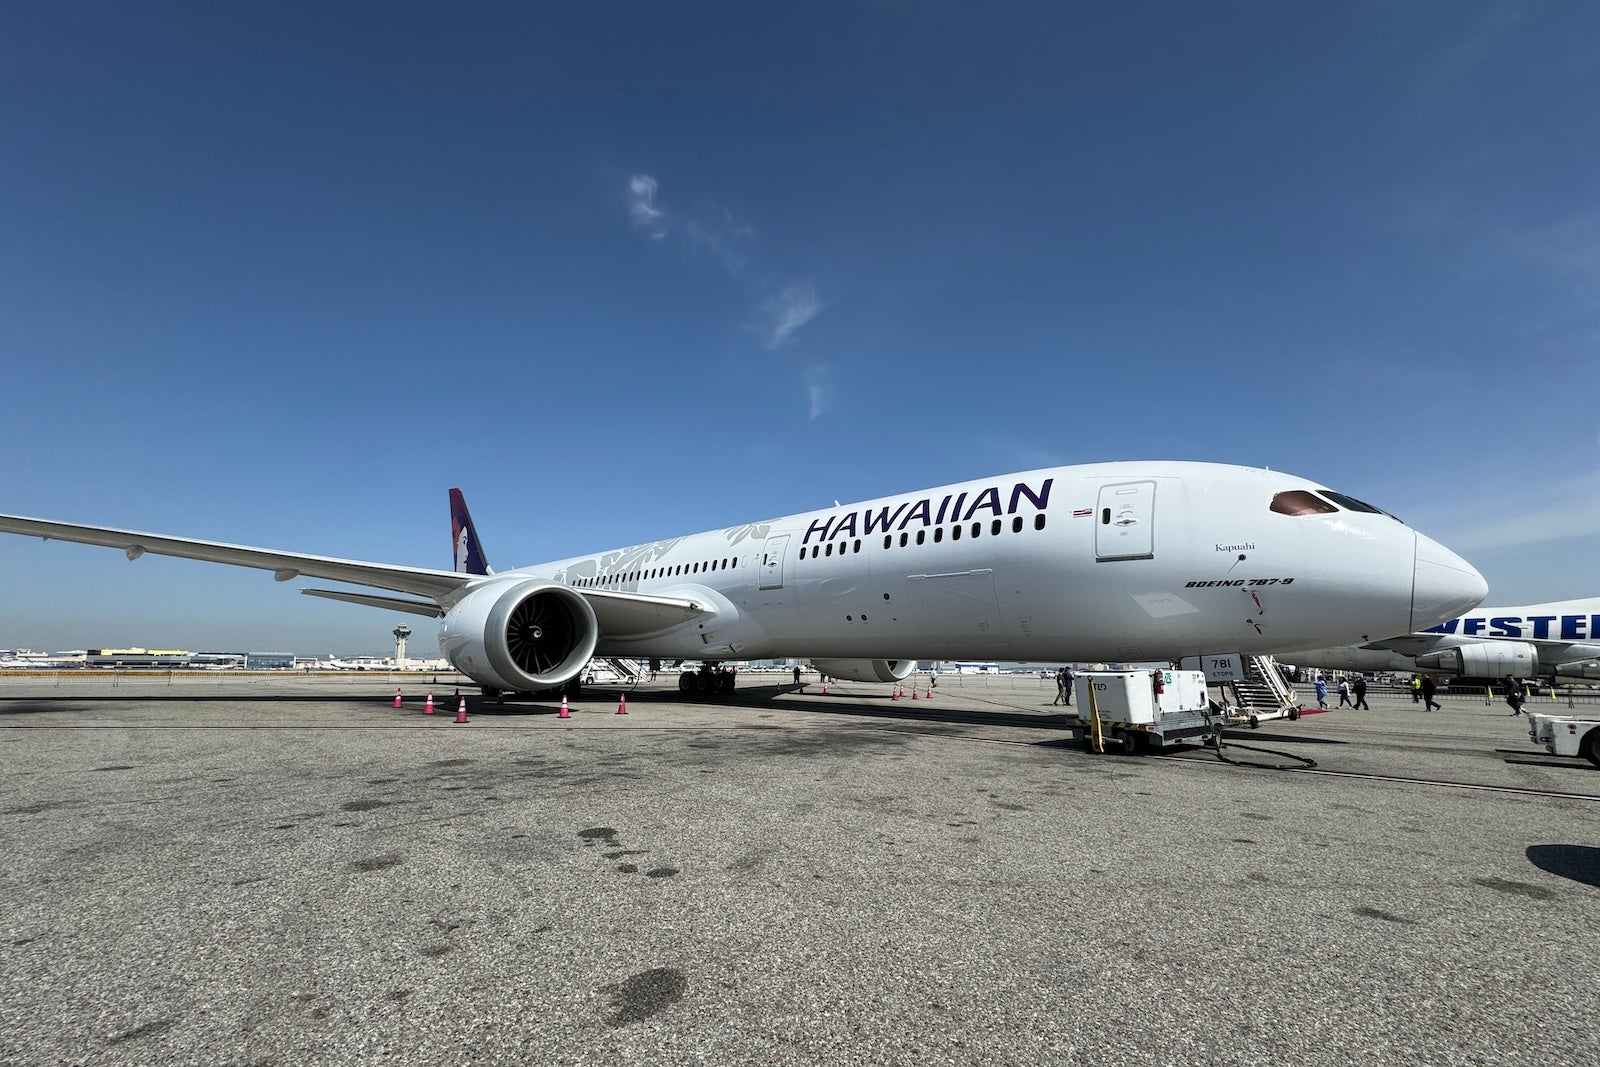 Read more about the article We got a sneak peek at Hawaiian Airlines’ stunning new Boeing 787-9 Dreamliner